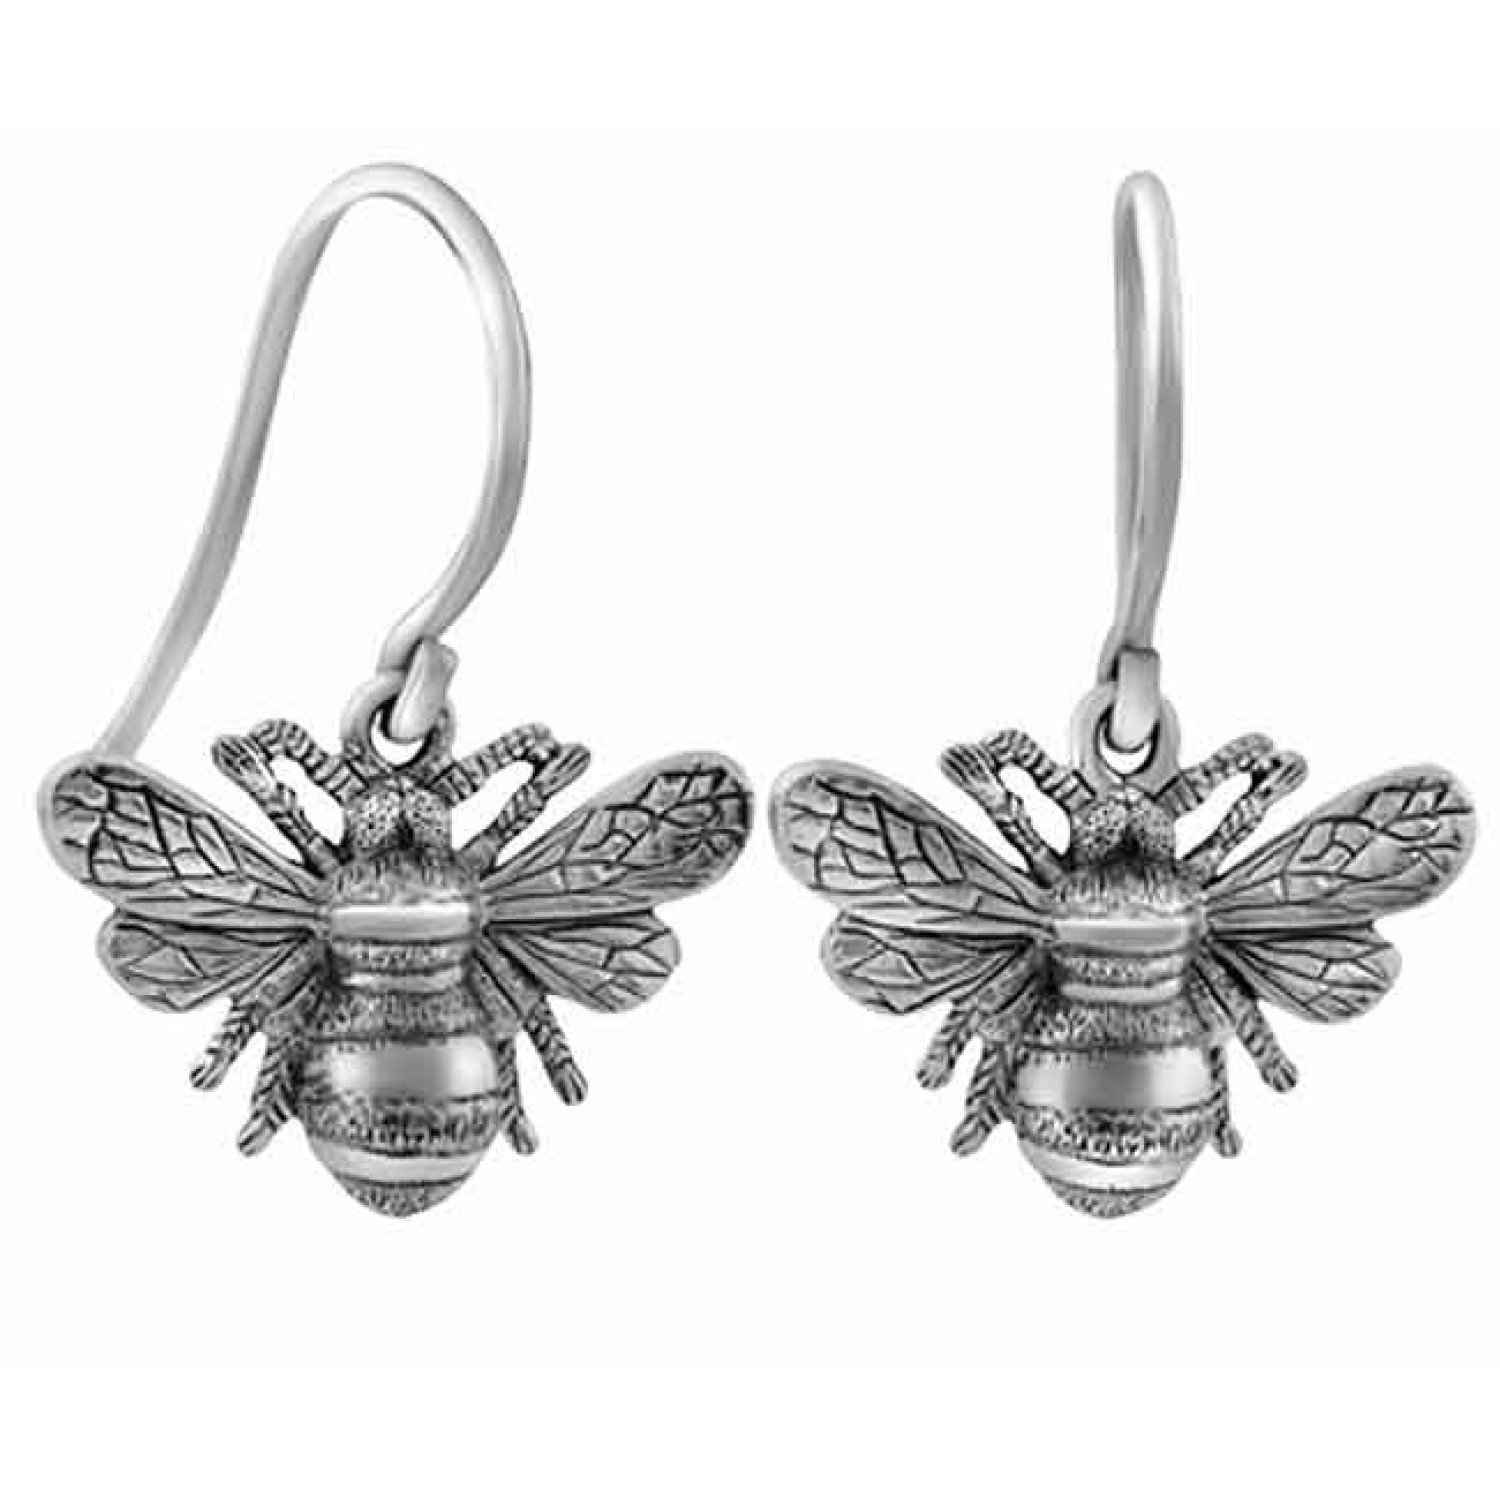 2E61005 Evolve NZ Bumble Bee Drop Earrings. The cherished bumble bee is a symbol of dedication and productivity. These Silver drop earrings are especially created for those who work diligently, shine brightly and create a little magic in the world every d